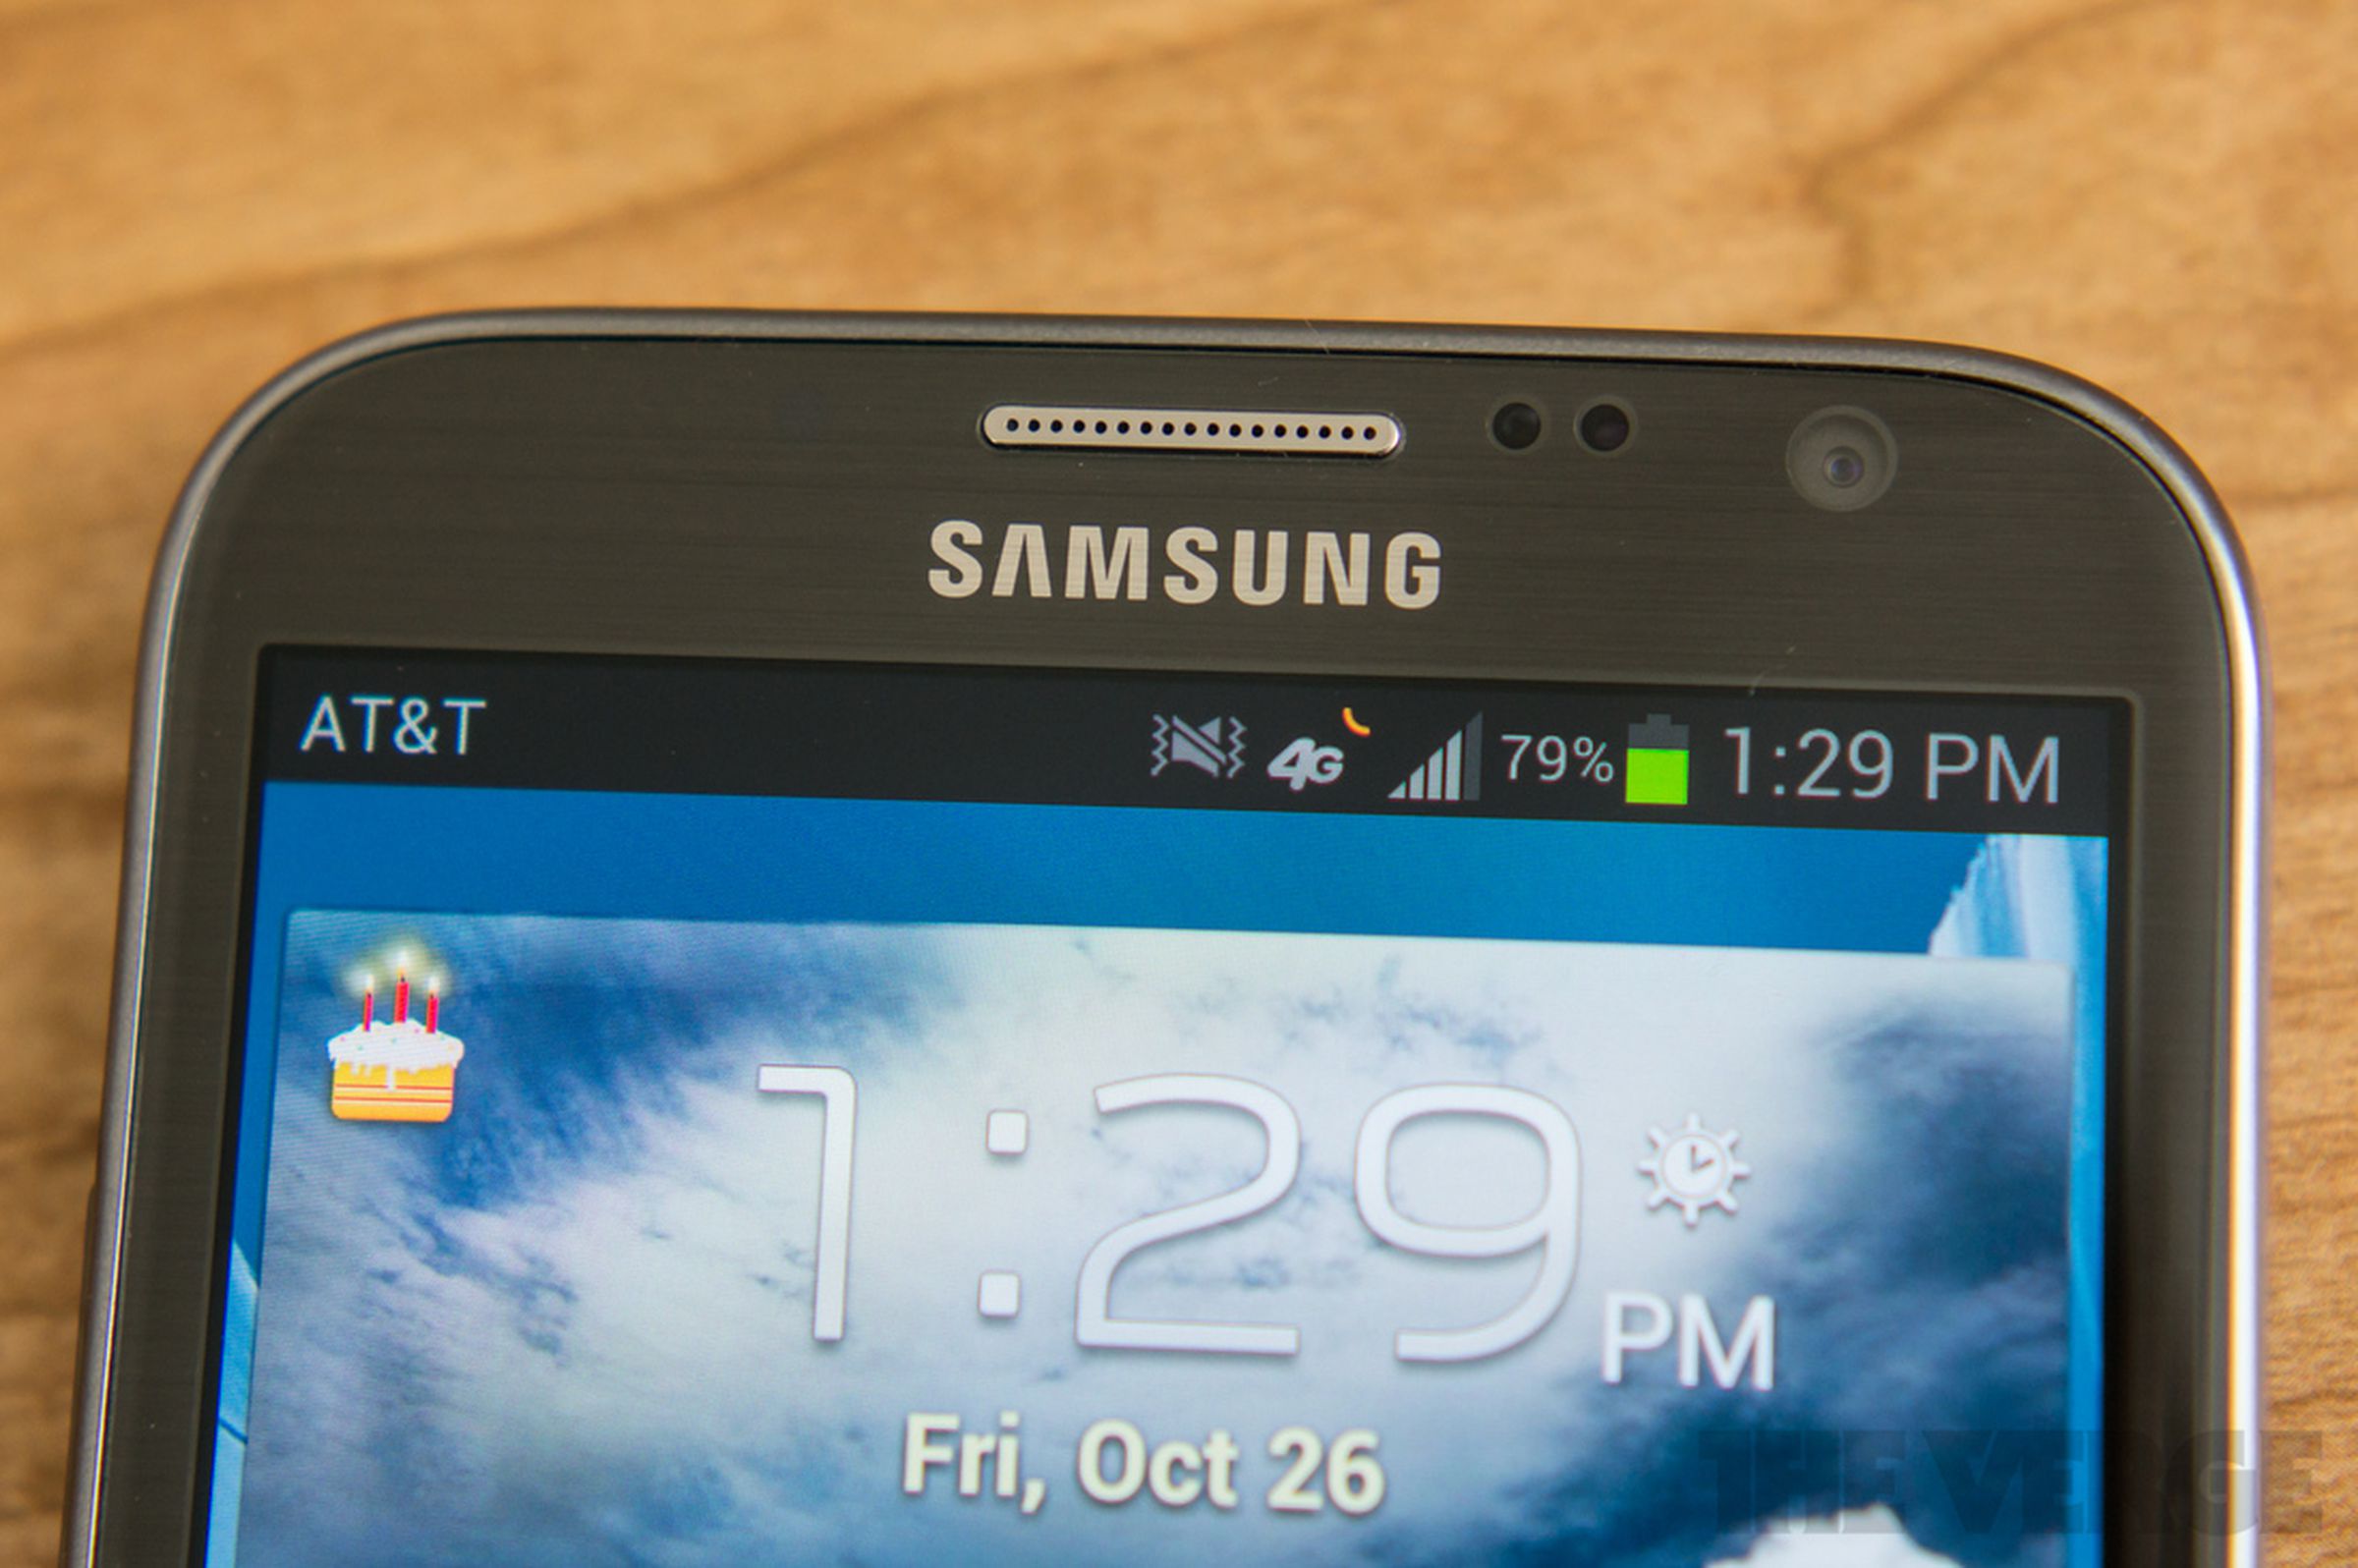 Samsung Galaxy Note II for AT&T review photos